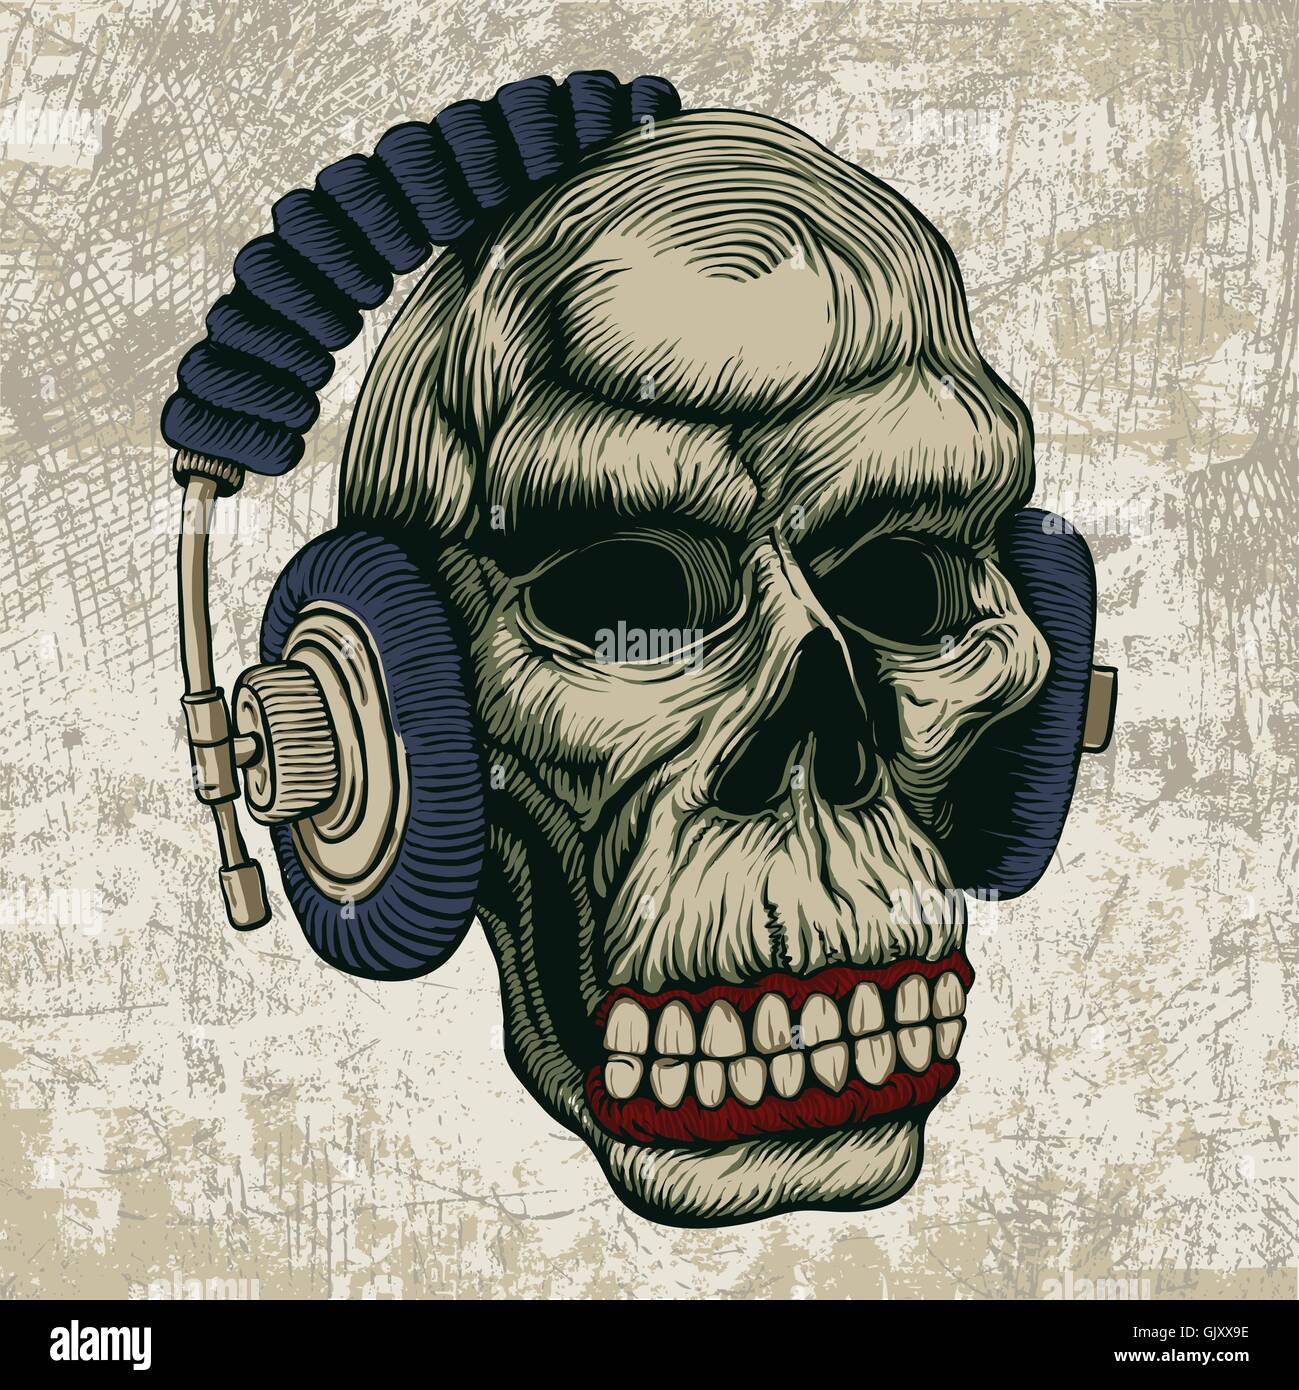 Skull Skeleton Half Face And Wearing Headphones Black And White Blood  Dripping BW Death Head Skeleton Dead Face Horror Human Bone Evil Tattoo  Grunge Scary Gothic Art Logo Clipart SVG  ClipArt